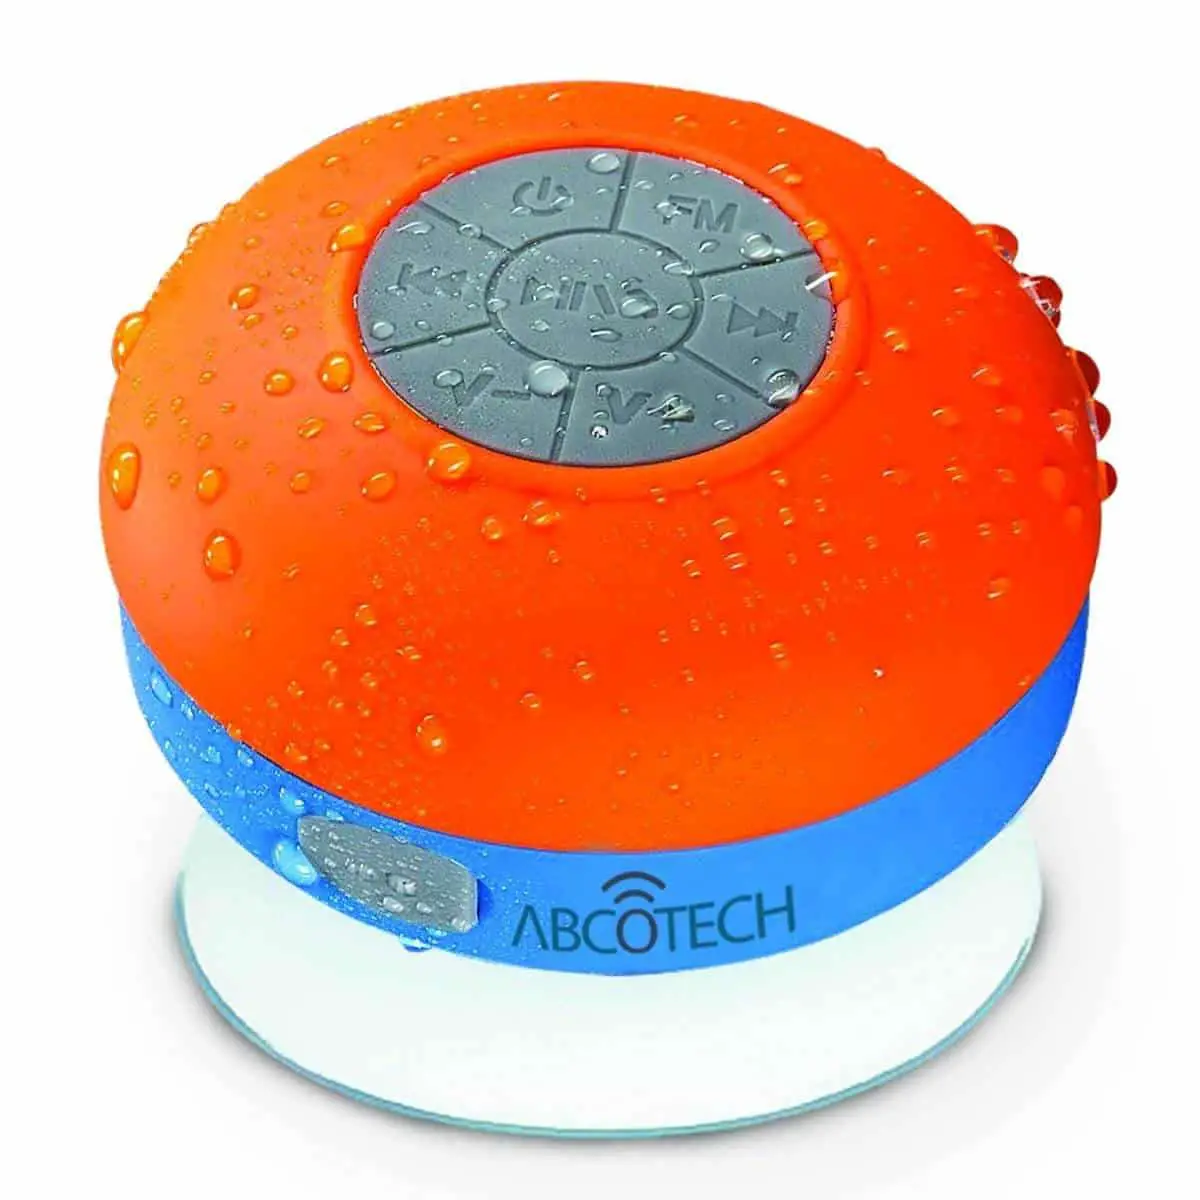 Bluetooth Shower Speaker | Top Entertainment Gadgets On Amazon For The Not So Tech-Savvy